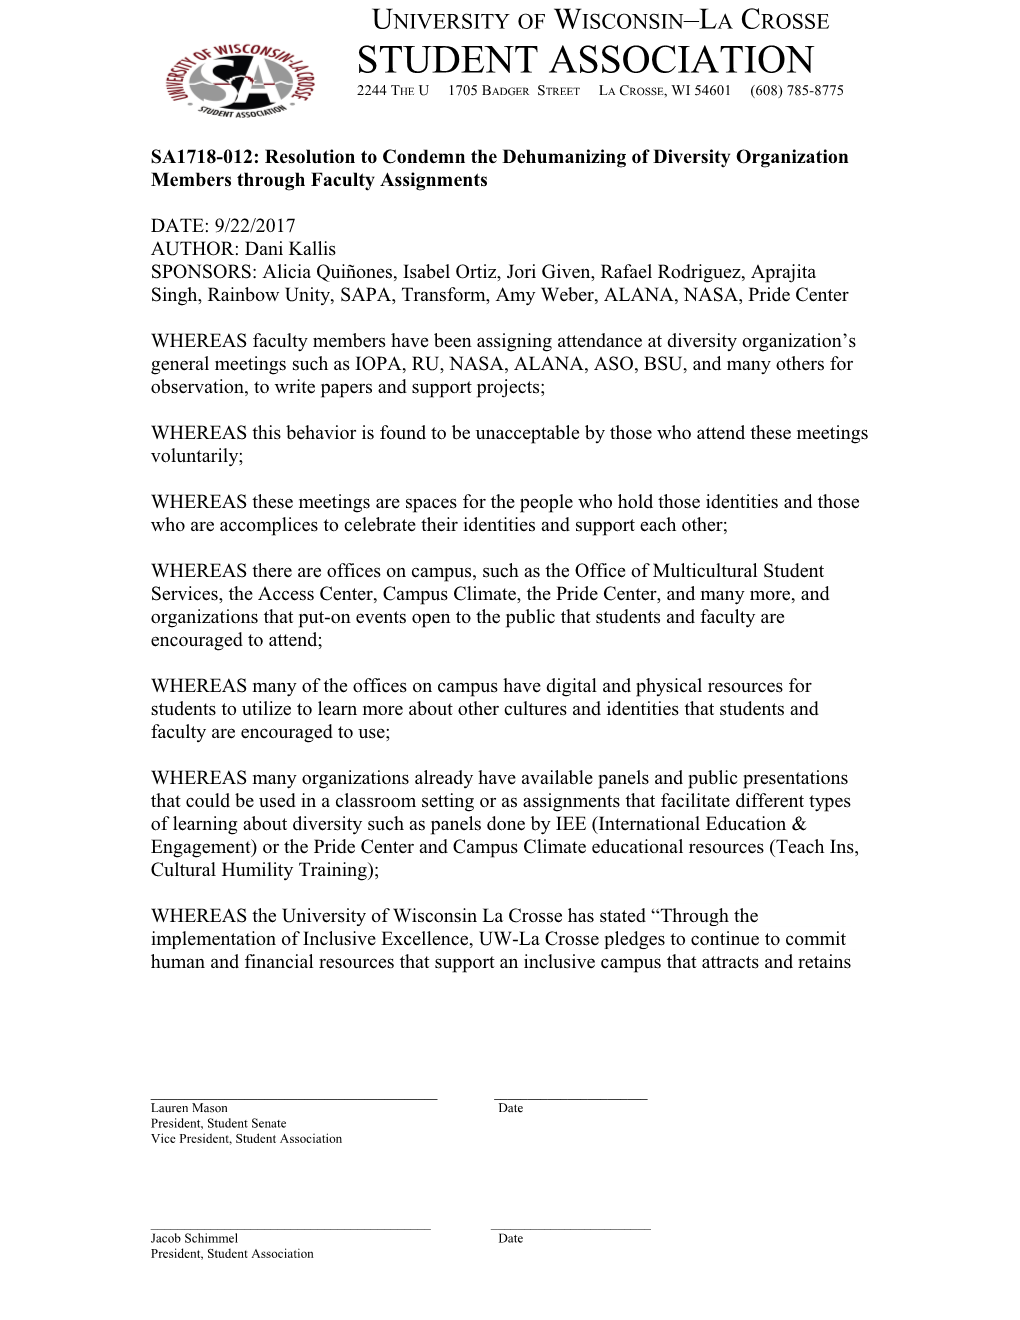 SA1718-012: Resolution to Condemn the Dehumanizing of Diversity Organization Members Through